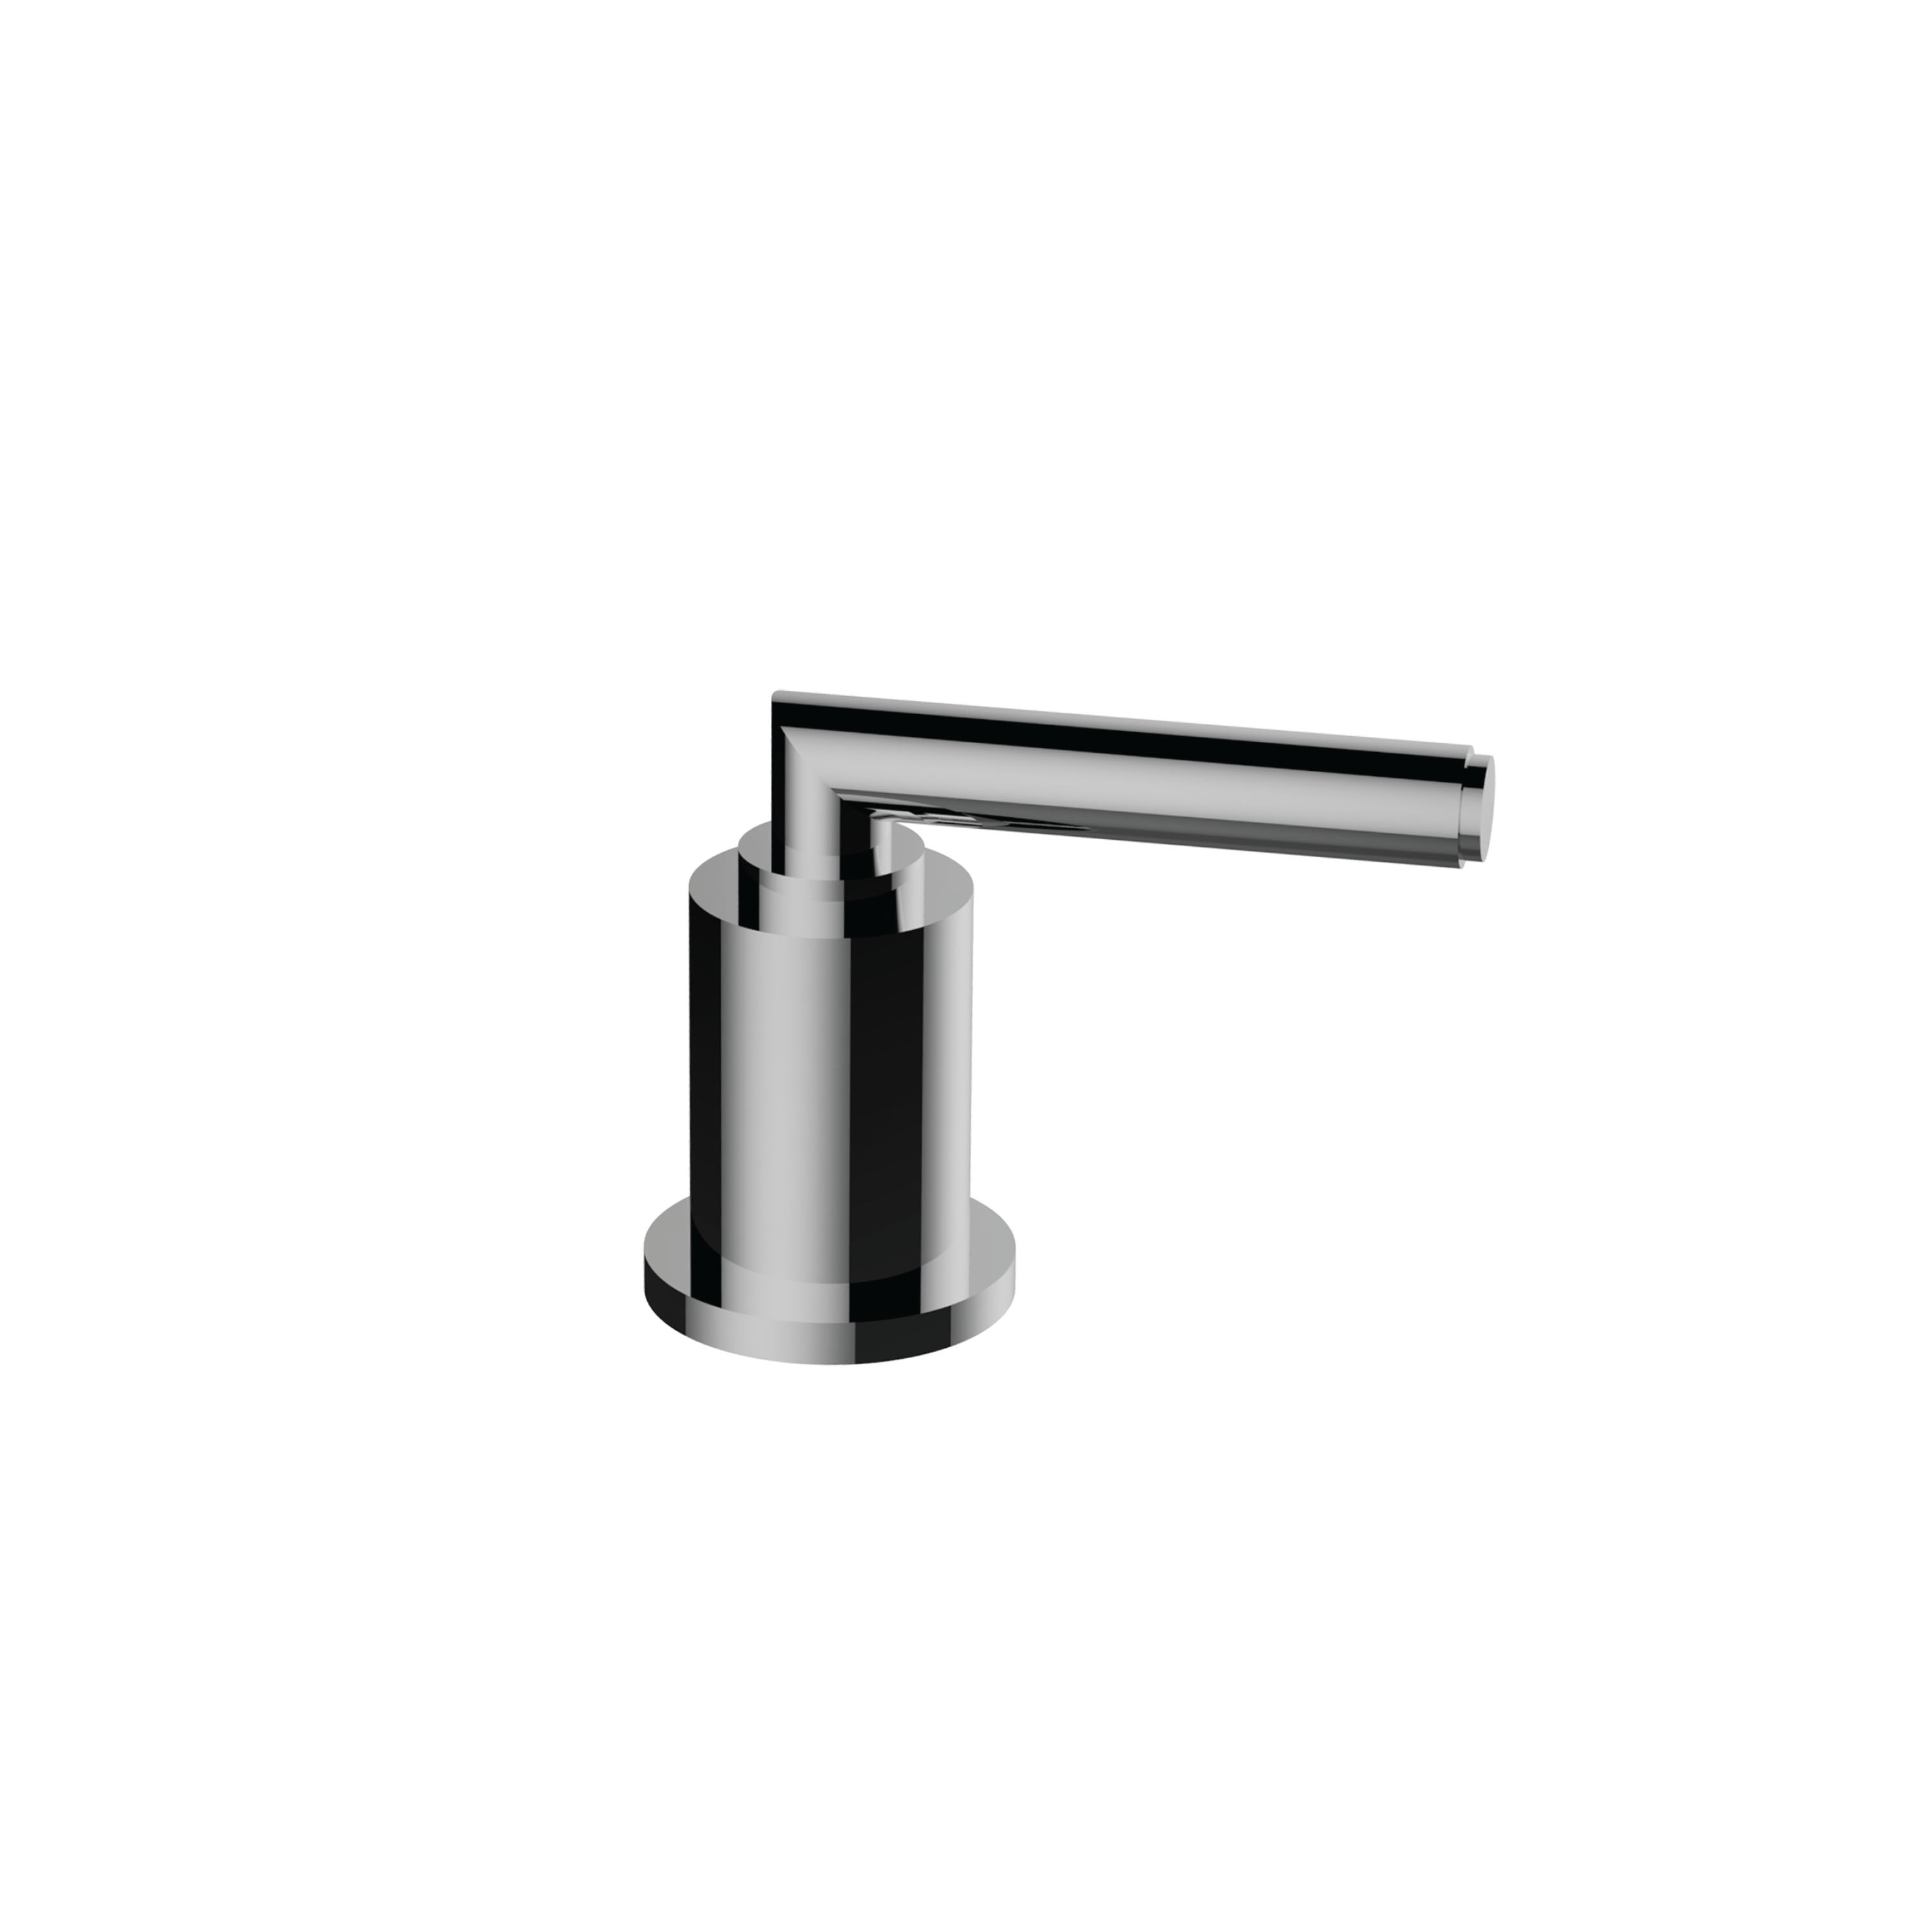 Santec YY-FO10-TM Wall Mount Volume Control Handle/ Diverter Trim with Fo Handle - Polished Chrome